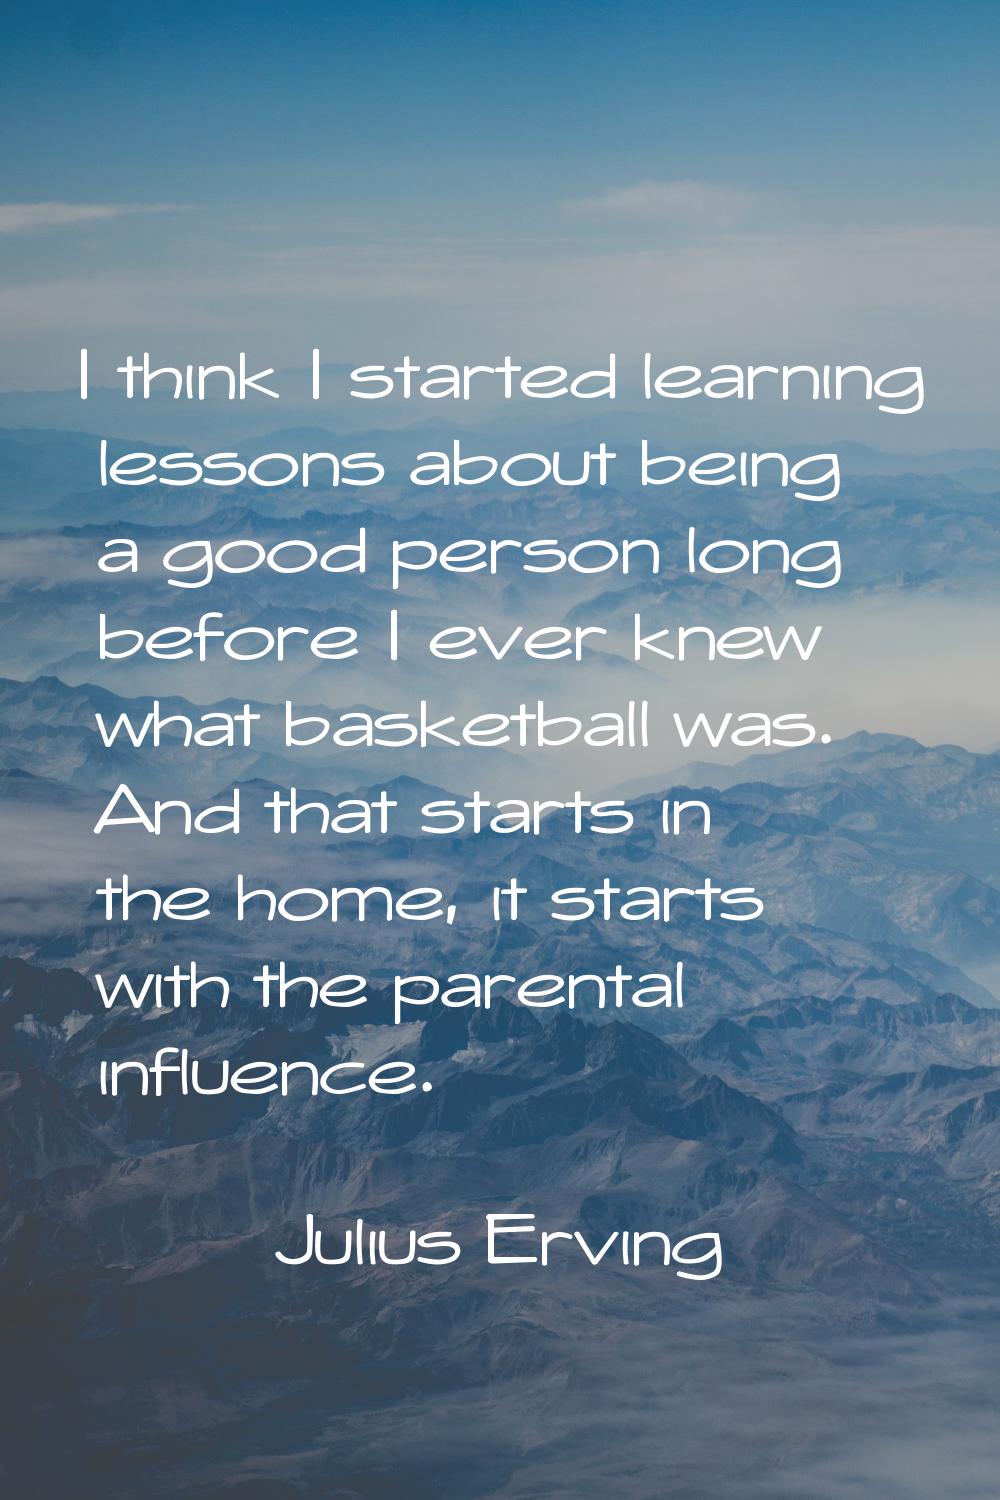 I think I started learning lessons about being a good person long before I ever knew what basketbal